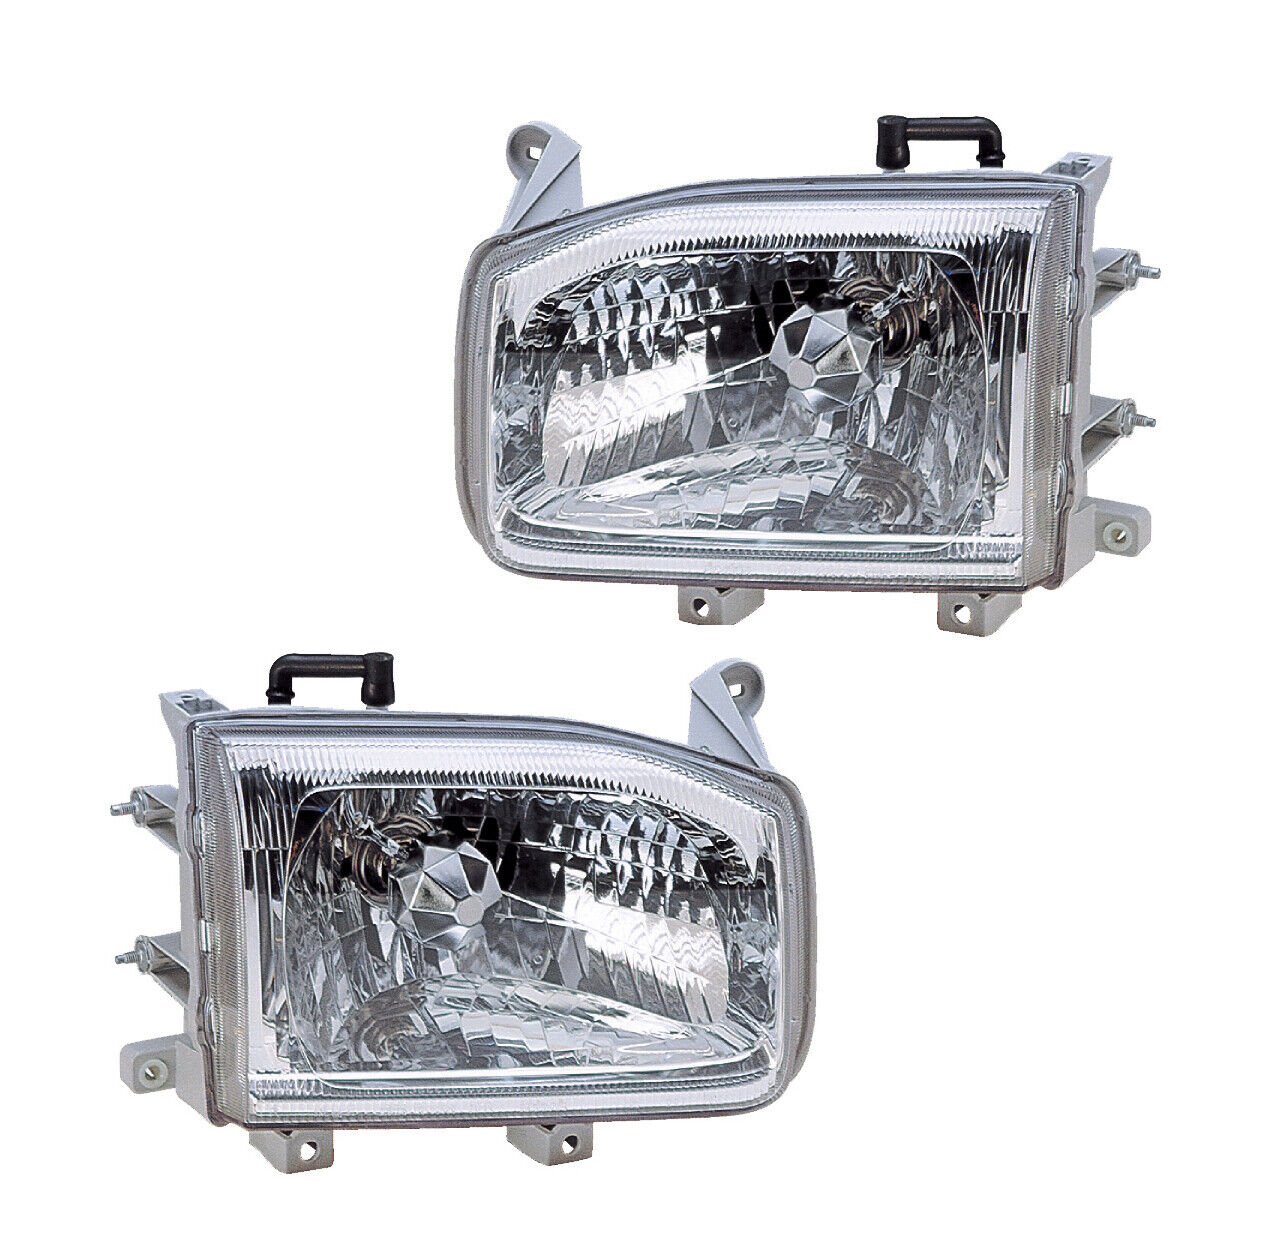 Headlights Front Lamps Pair Set for 99-04 Nissan Pathfinder Left & Right